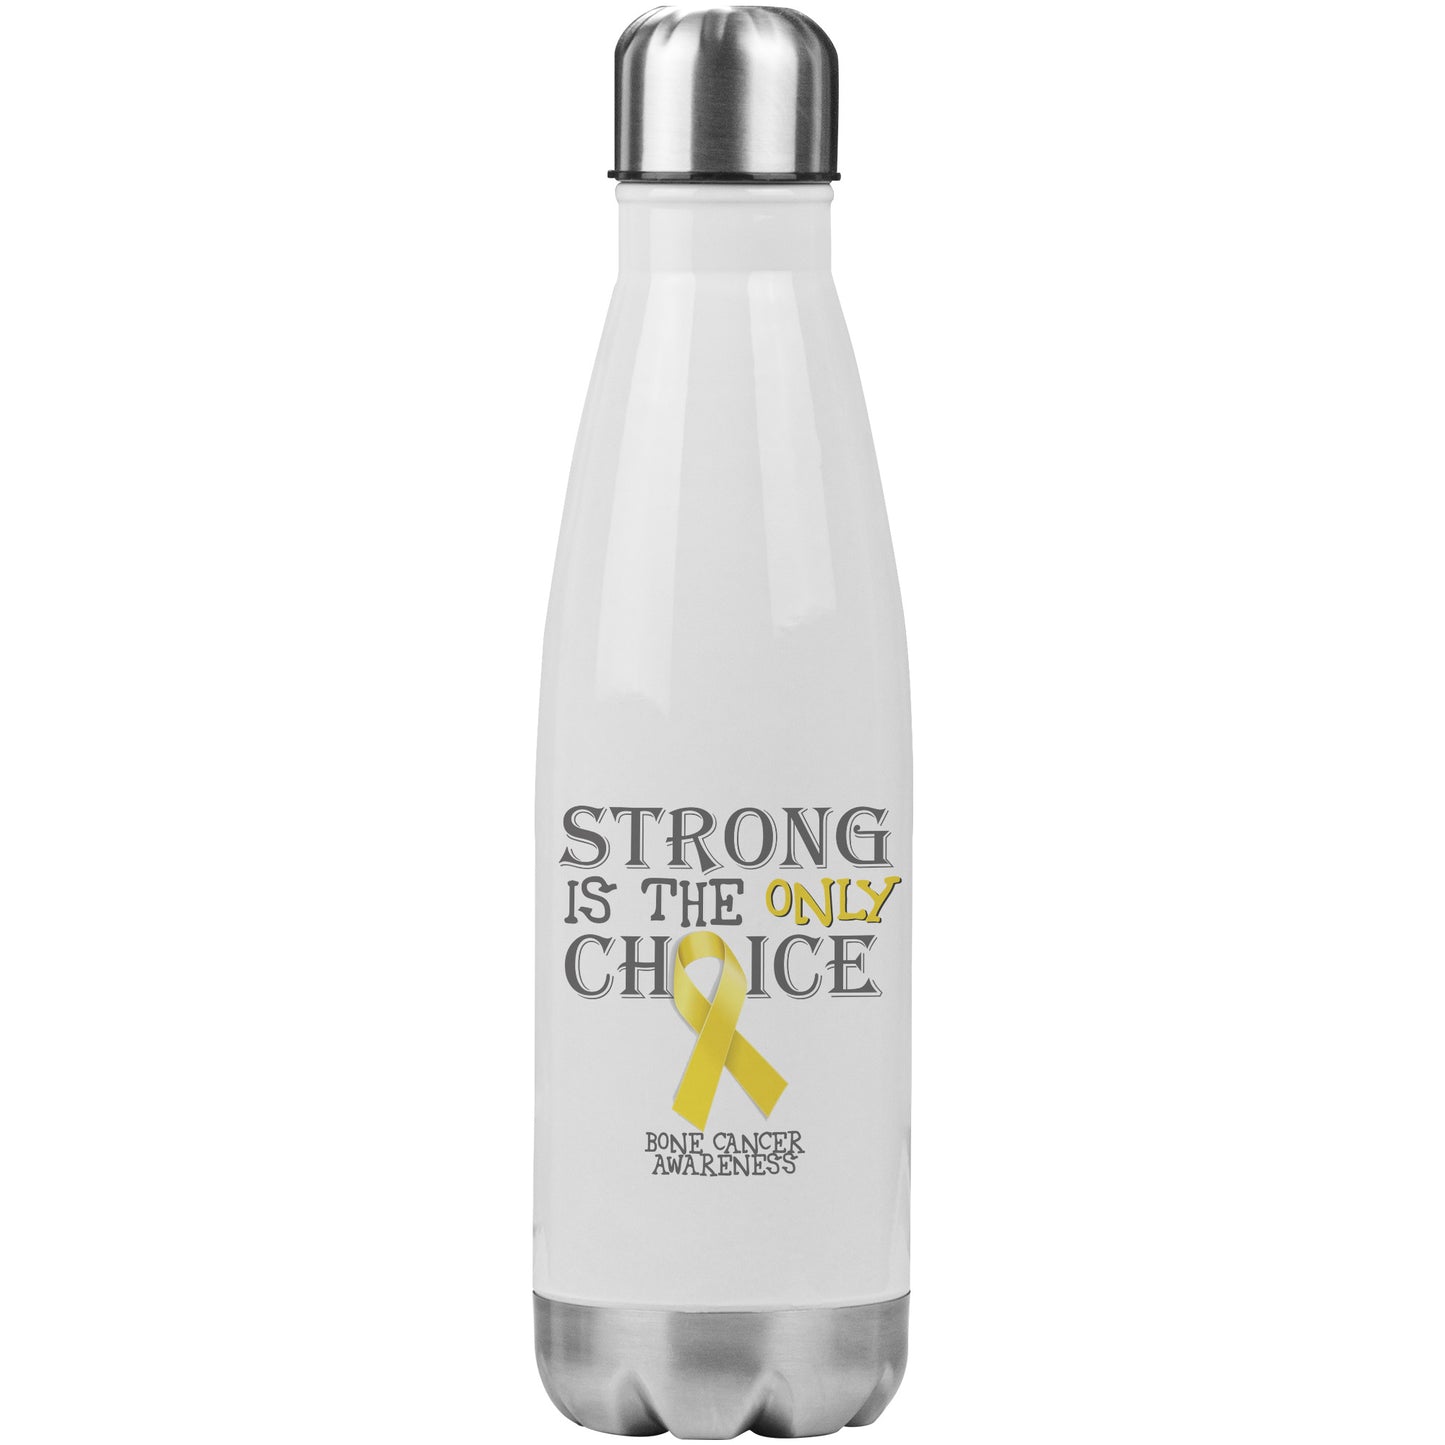 Strong is the Only Choice -Bone Cancer Awareness 20oz Insulated Water Bottle